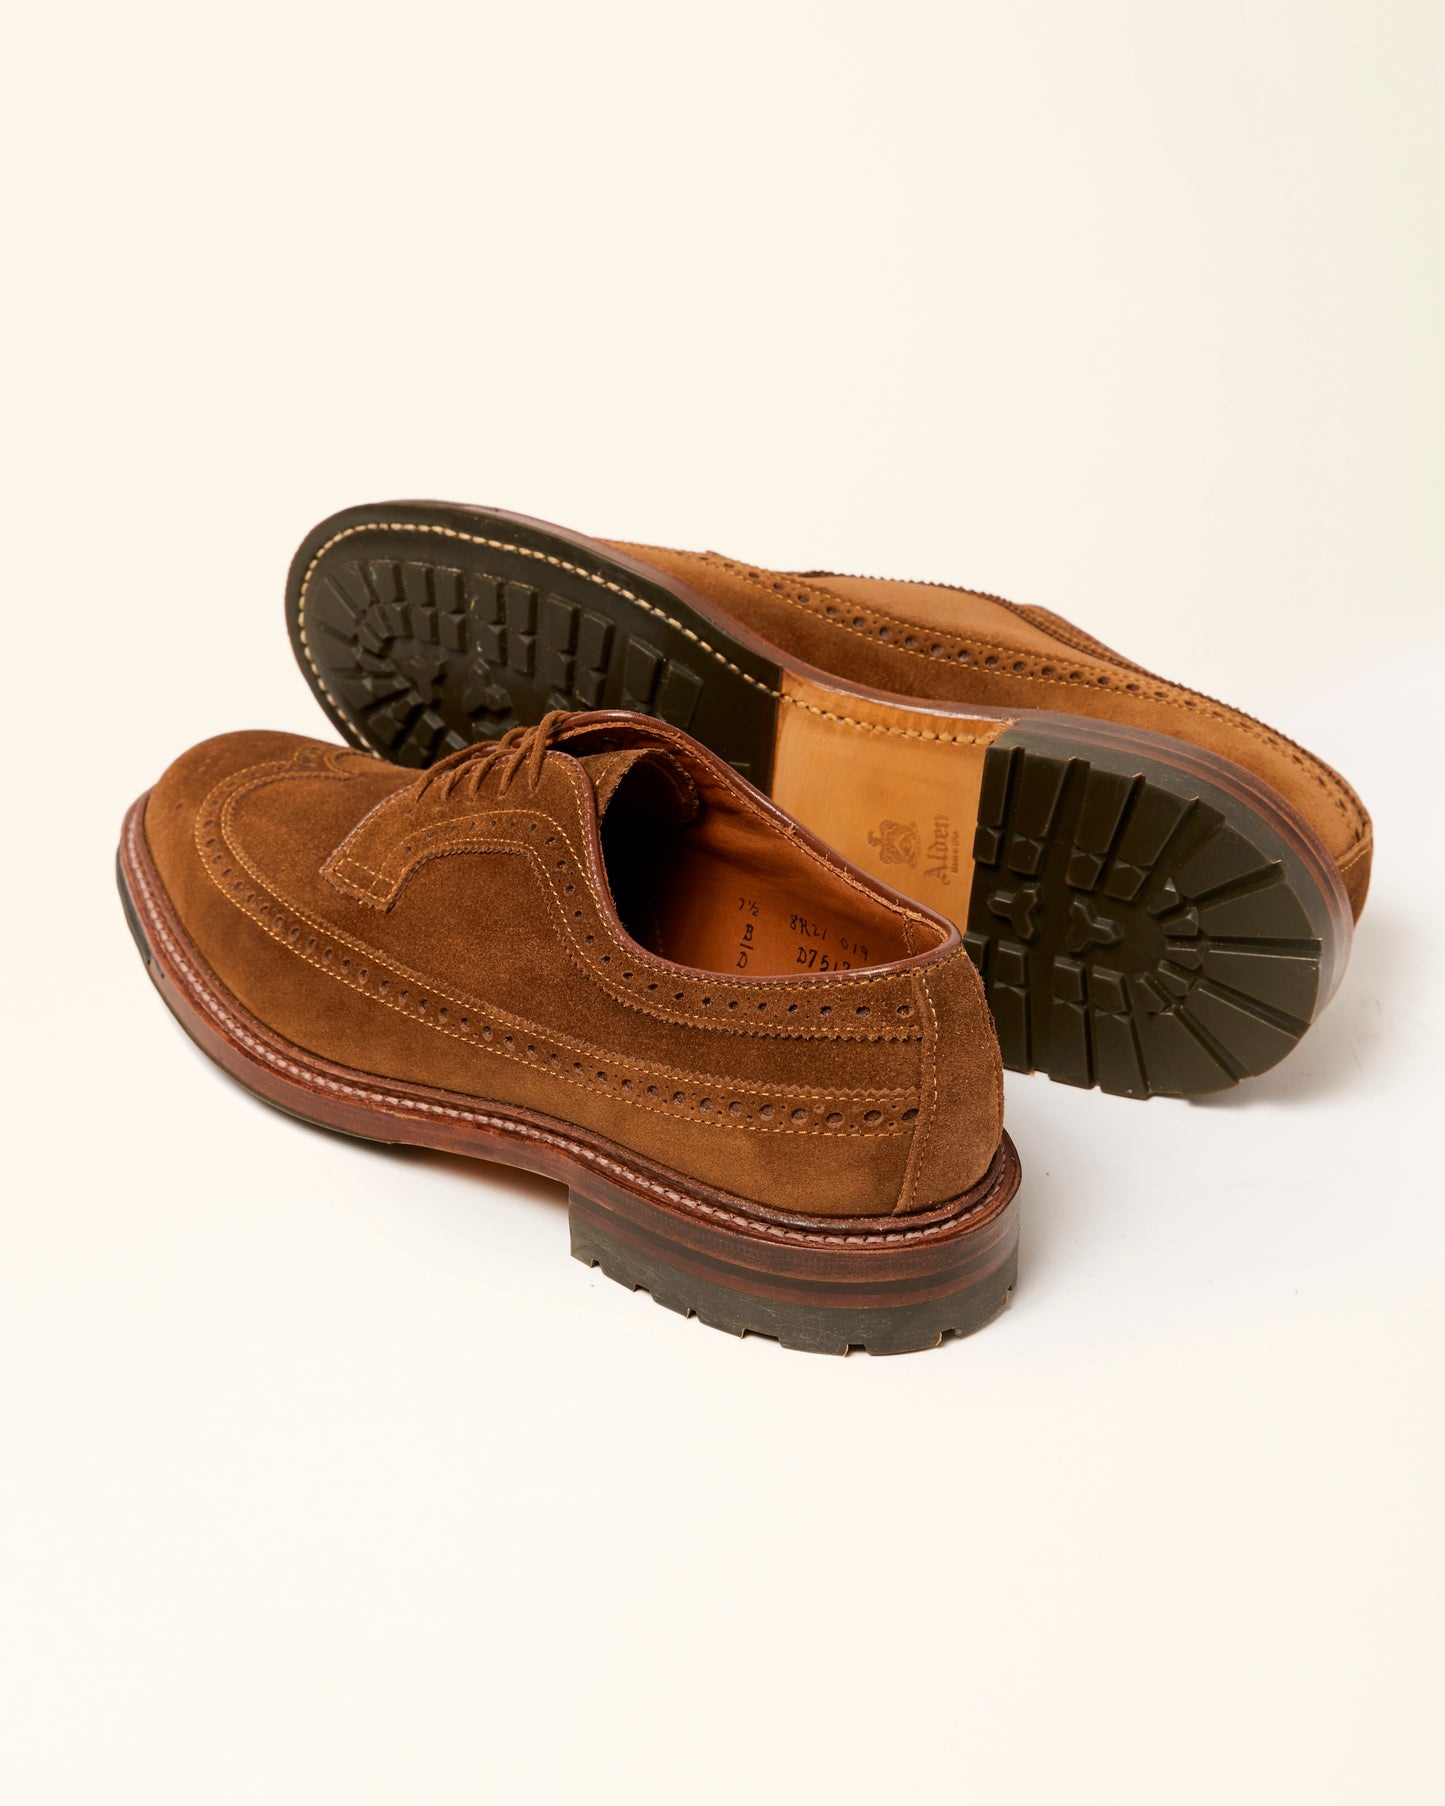 "Pike" Long Wing Blucher in Snuff Suede, Barrie Last